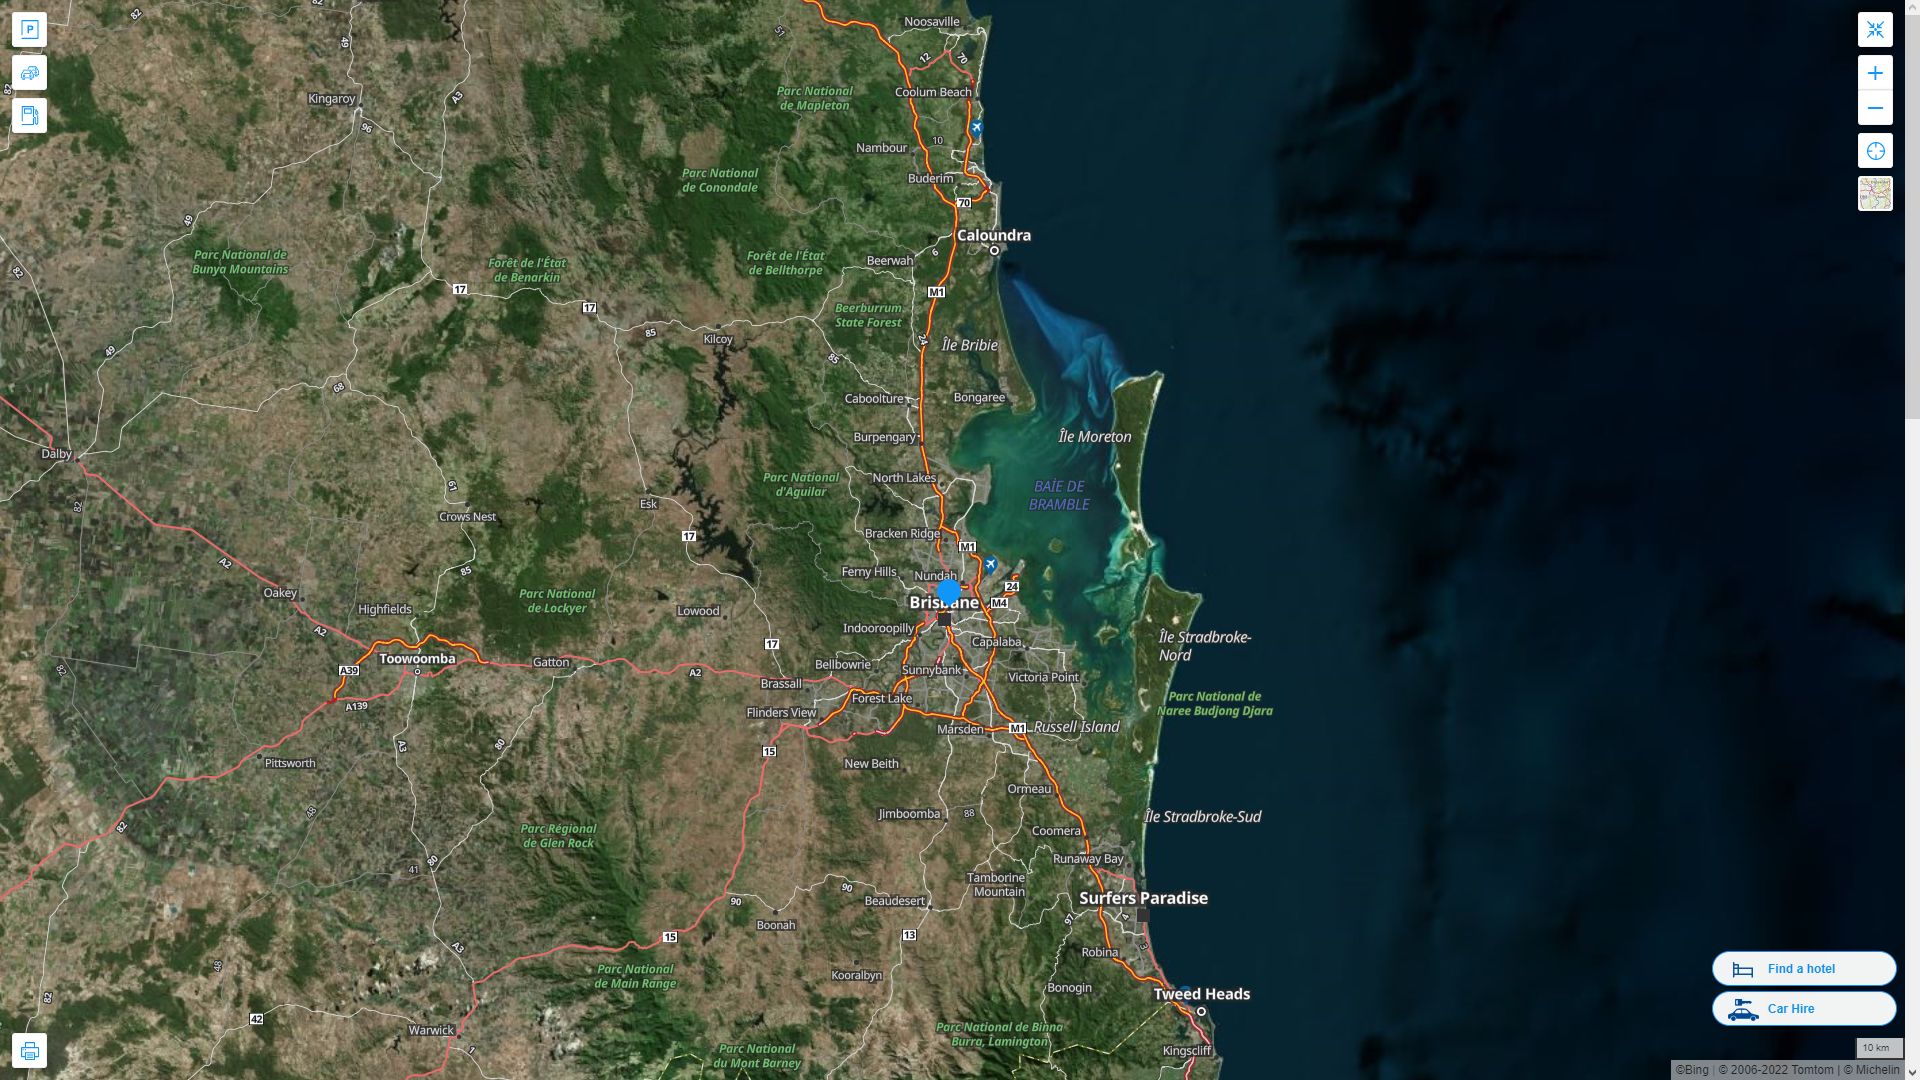 Brisbane Highway and Road Map with Satellite View